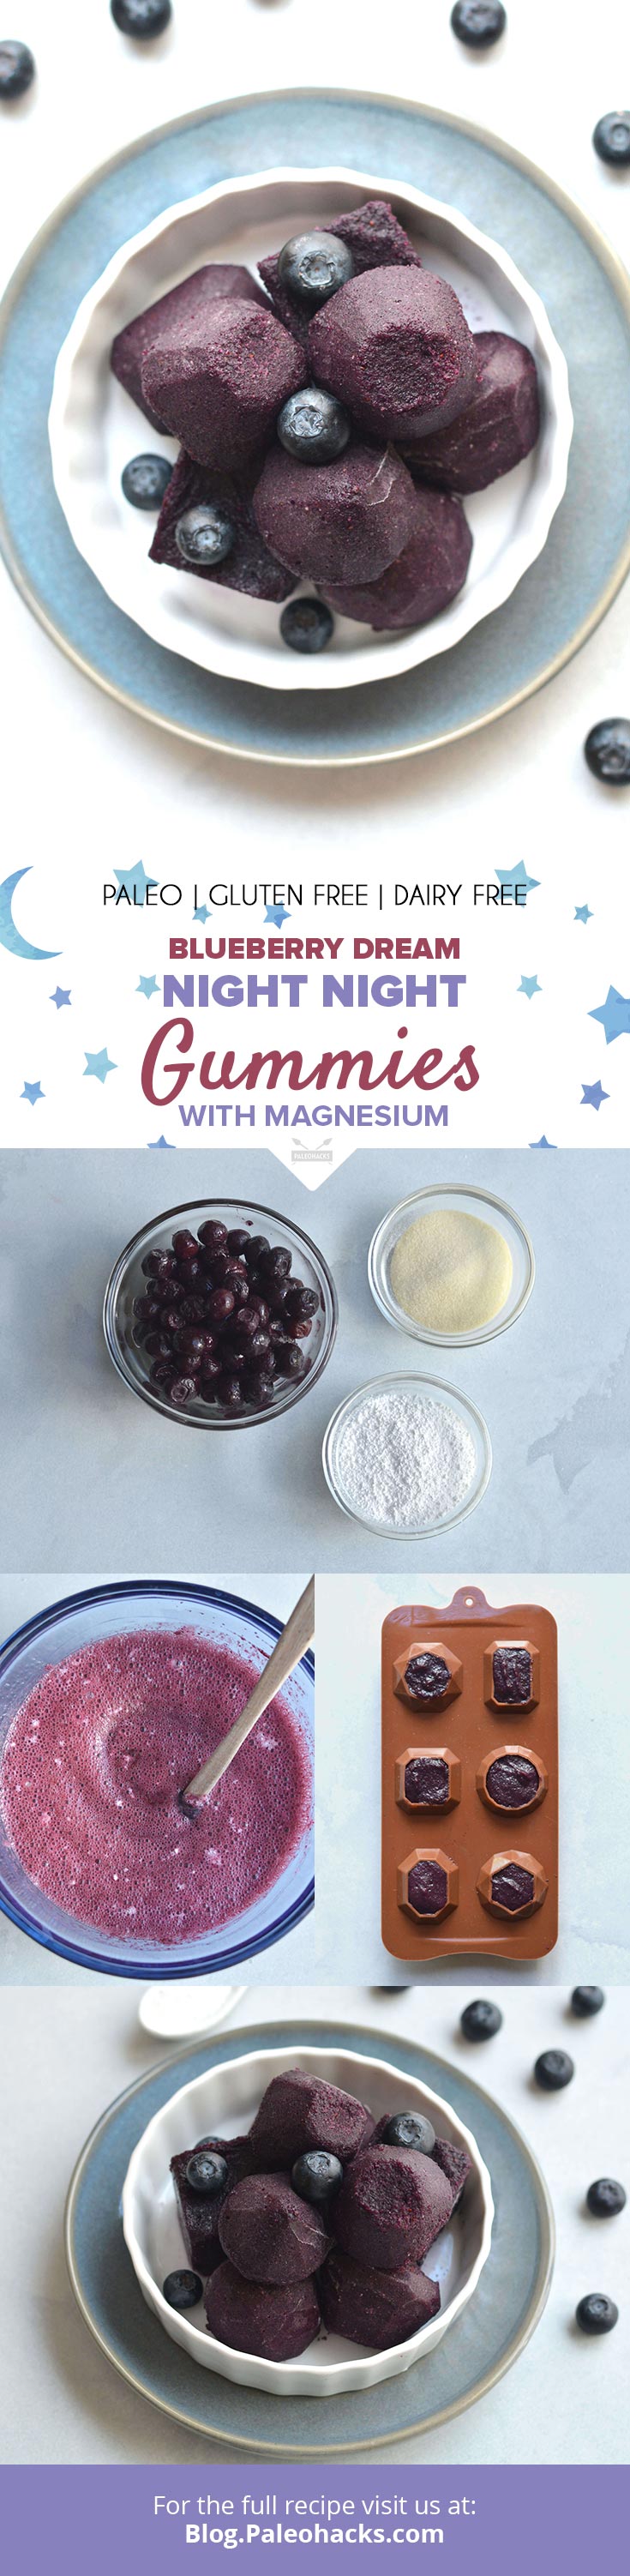 Made with four ingredients - blueberries, gelatin, magnesium, and water - these gummies are a delicious nighttime snack you can enjoy for better sleep.